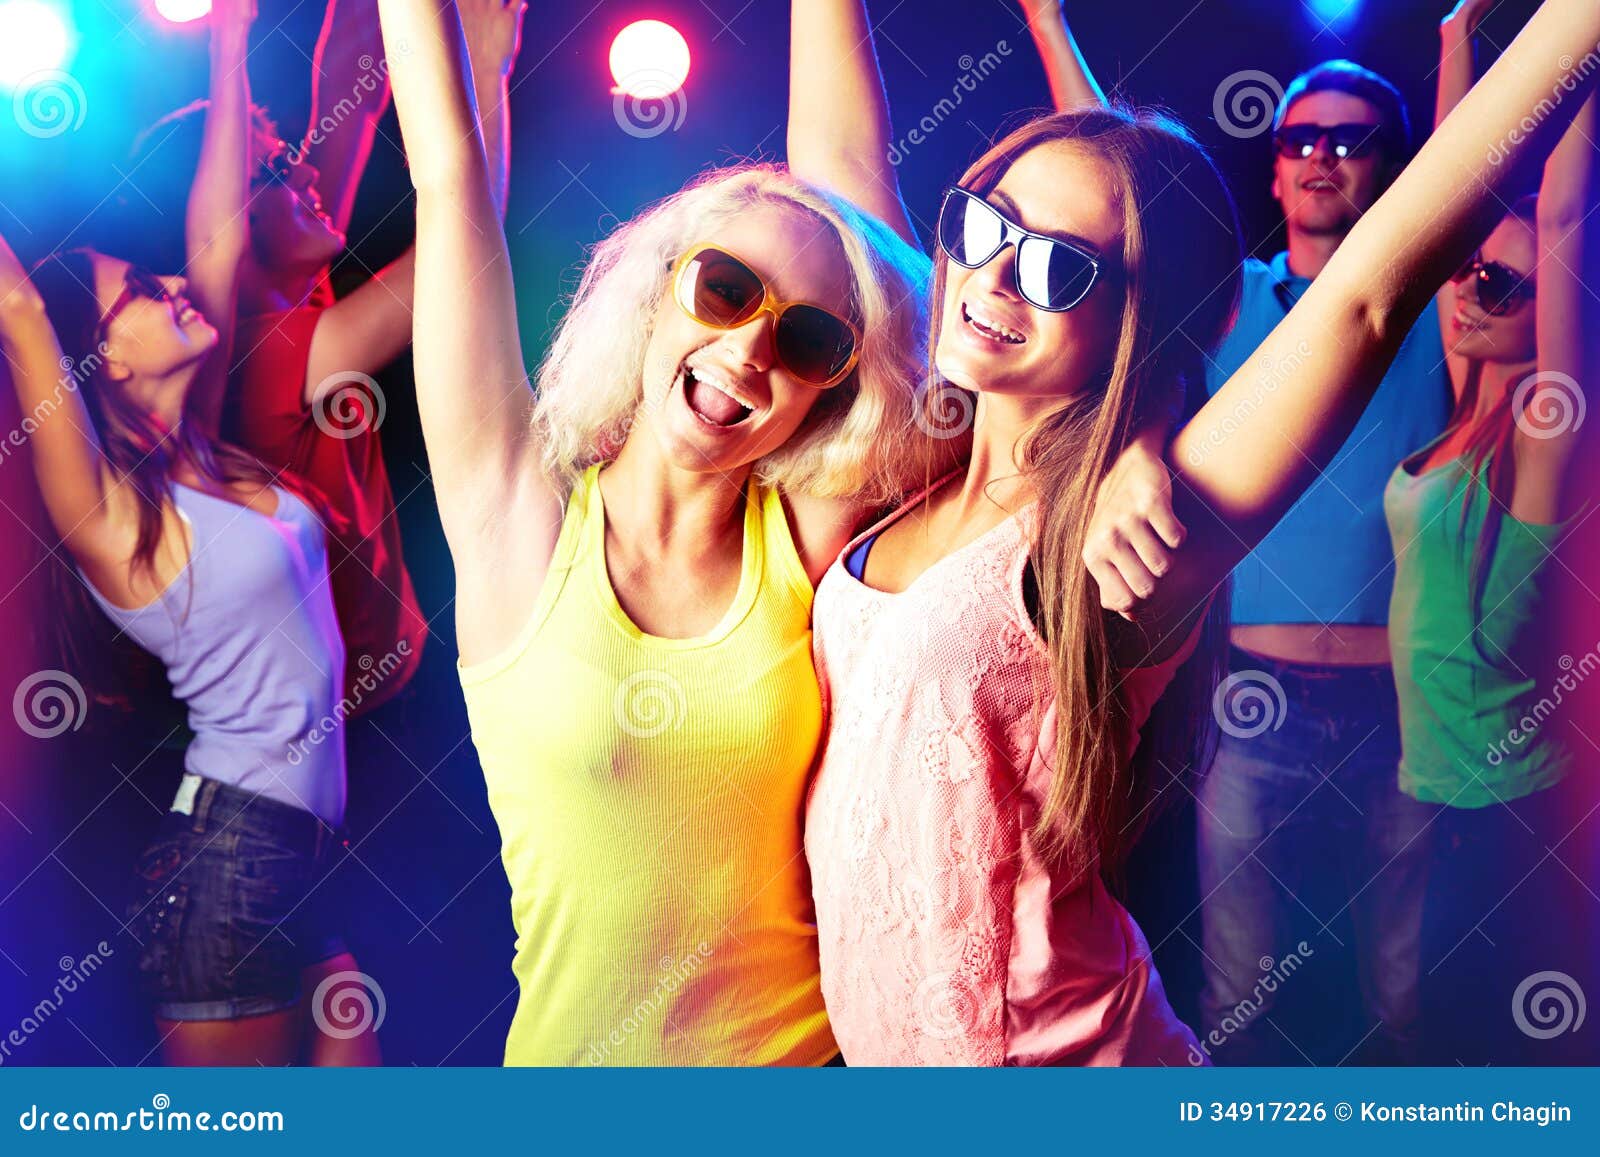 Young people at party. stock photo. Image of group, entertainment ...